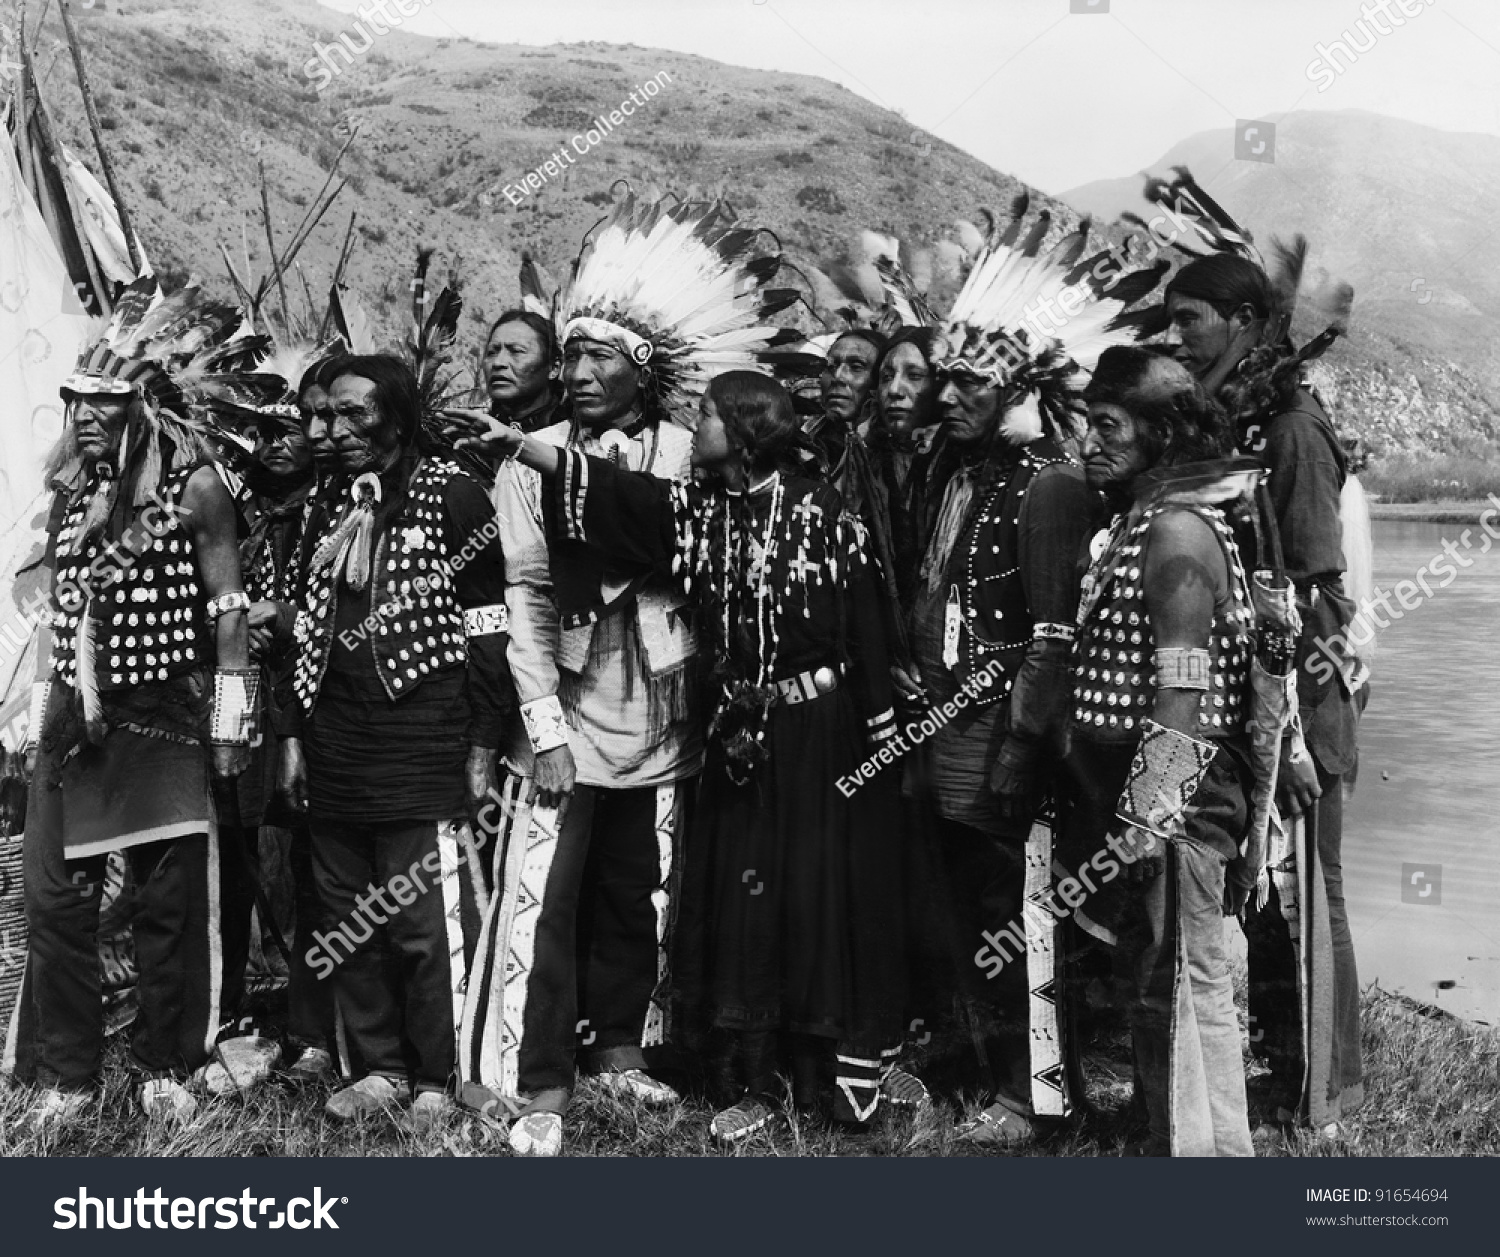 The Native American Group 72